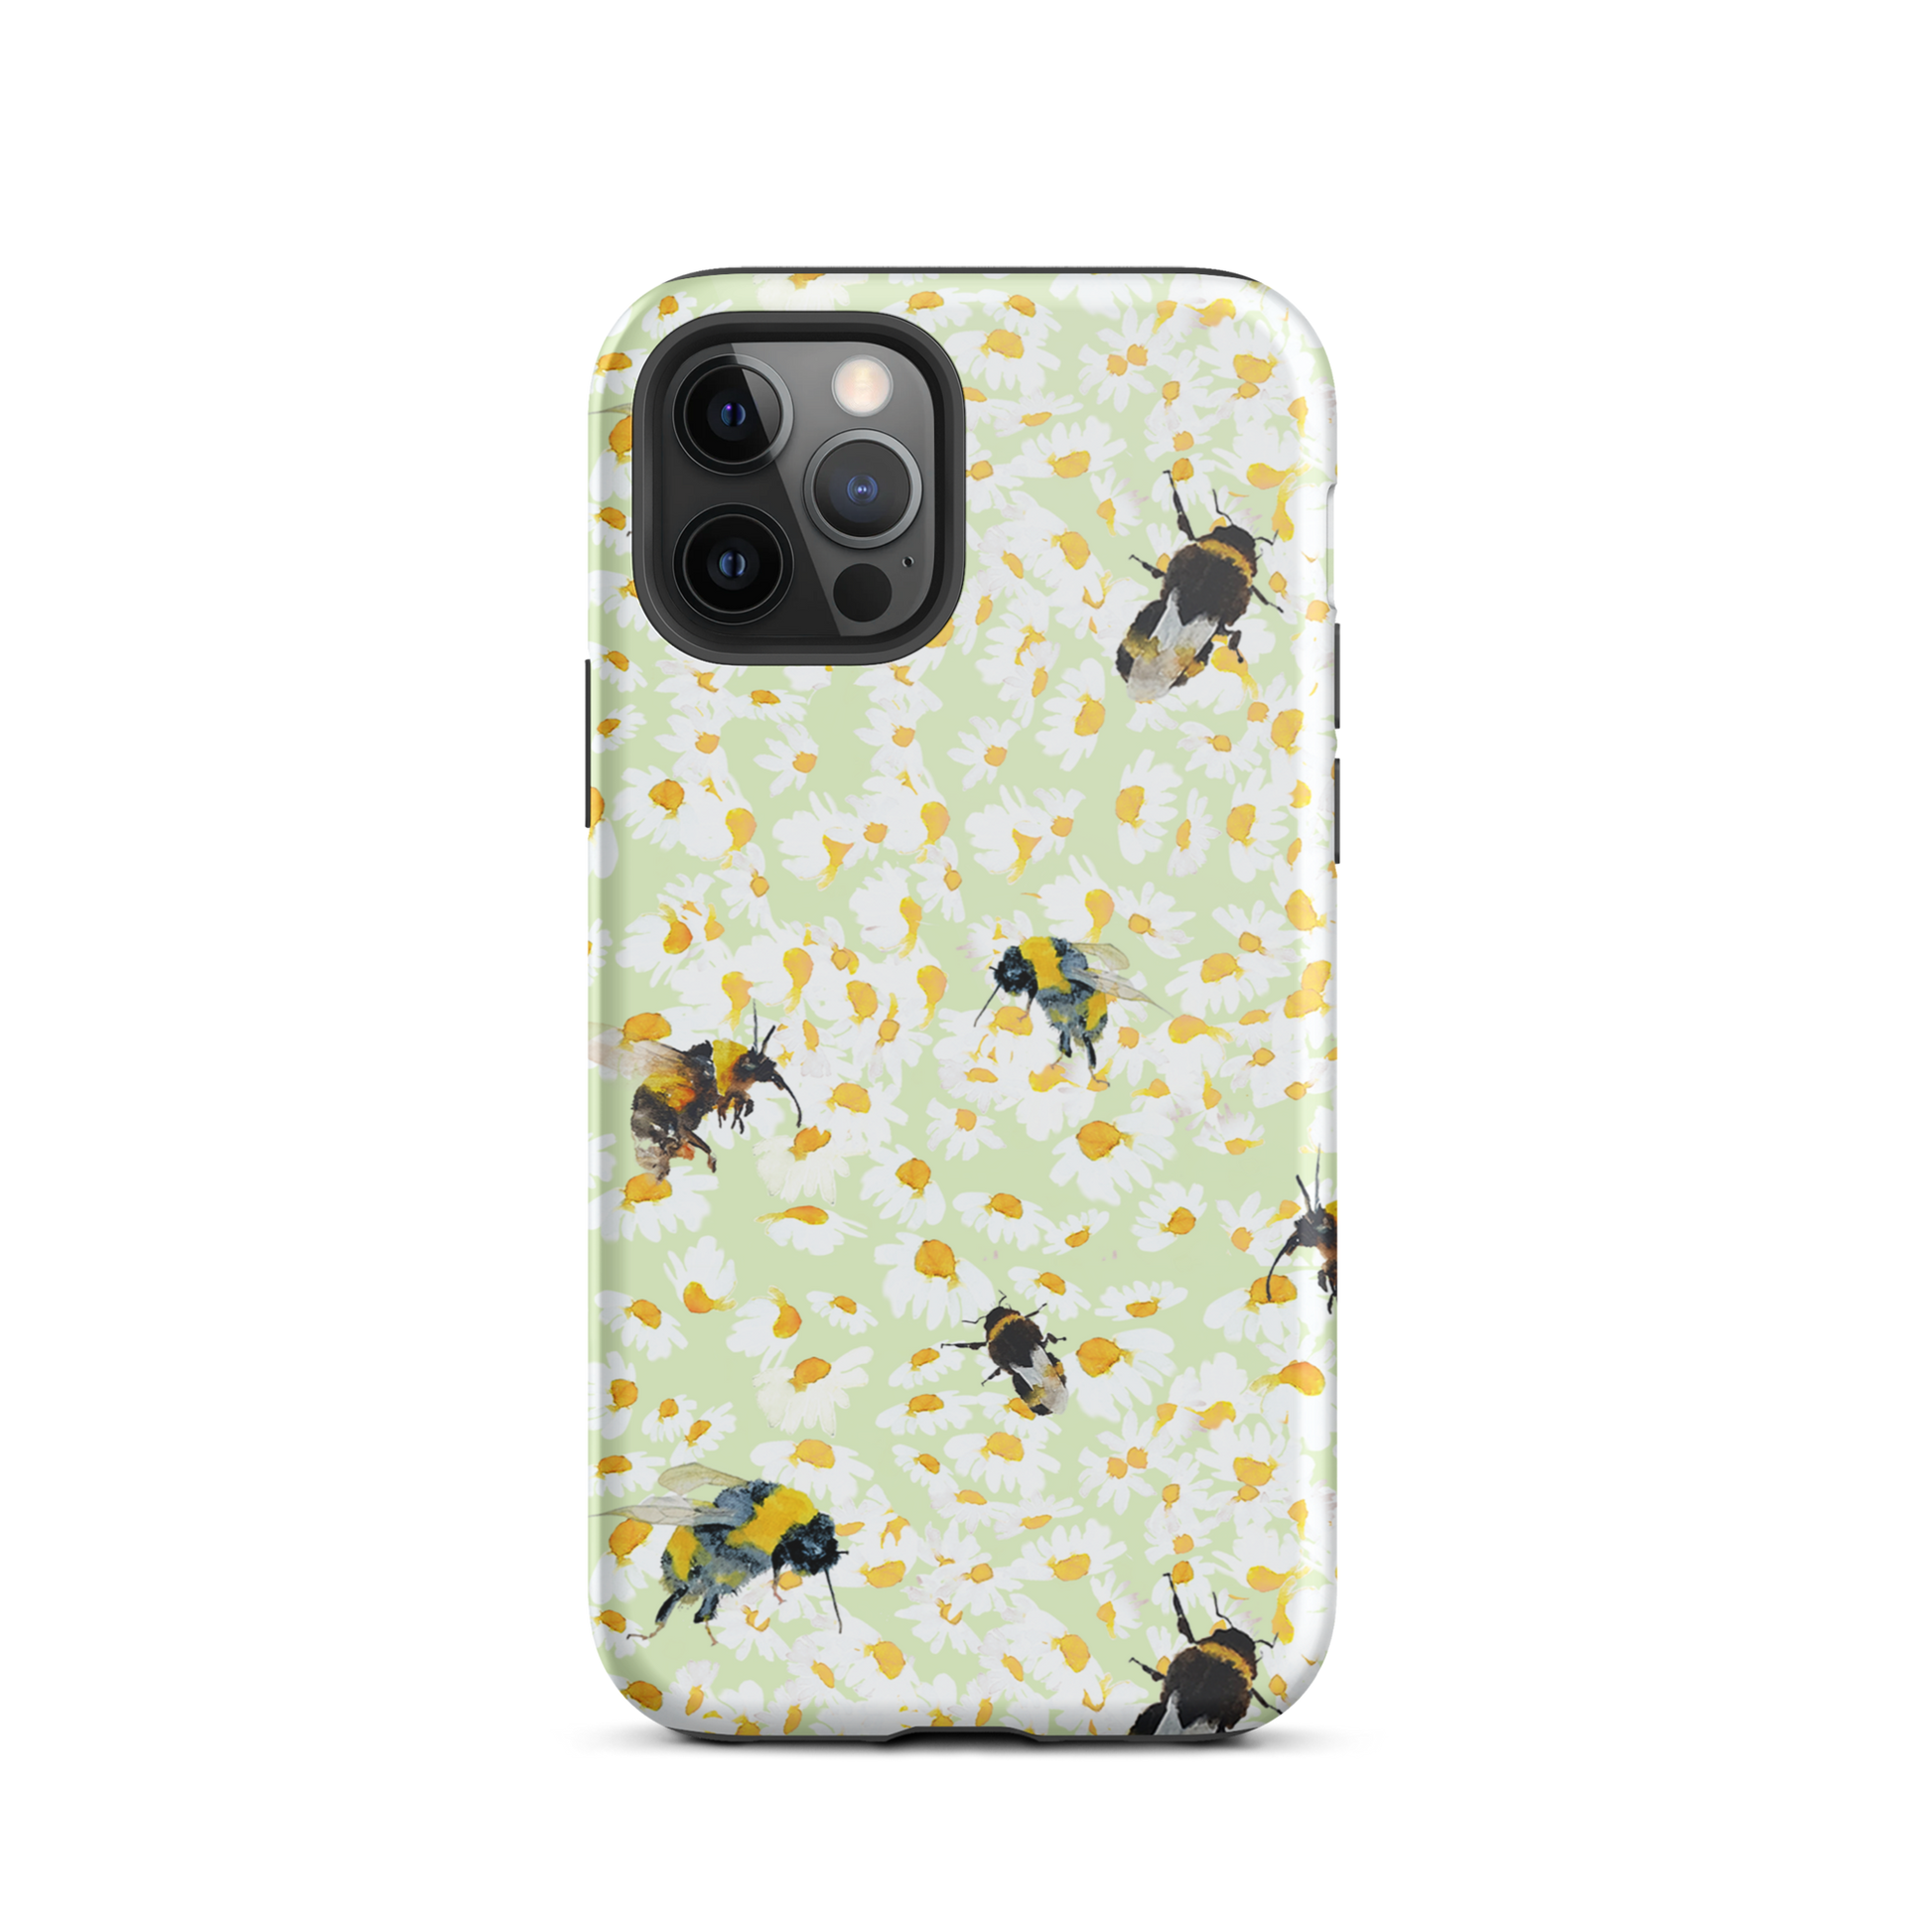 Beautiful Annie Grant Bee and Daisies Mobile Phone